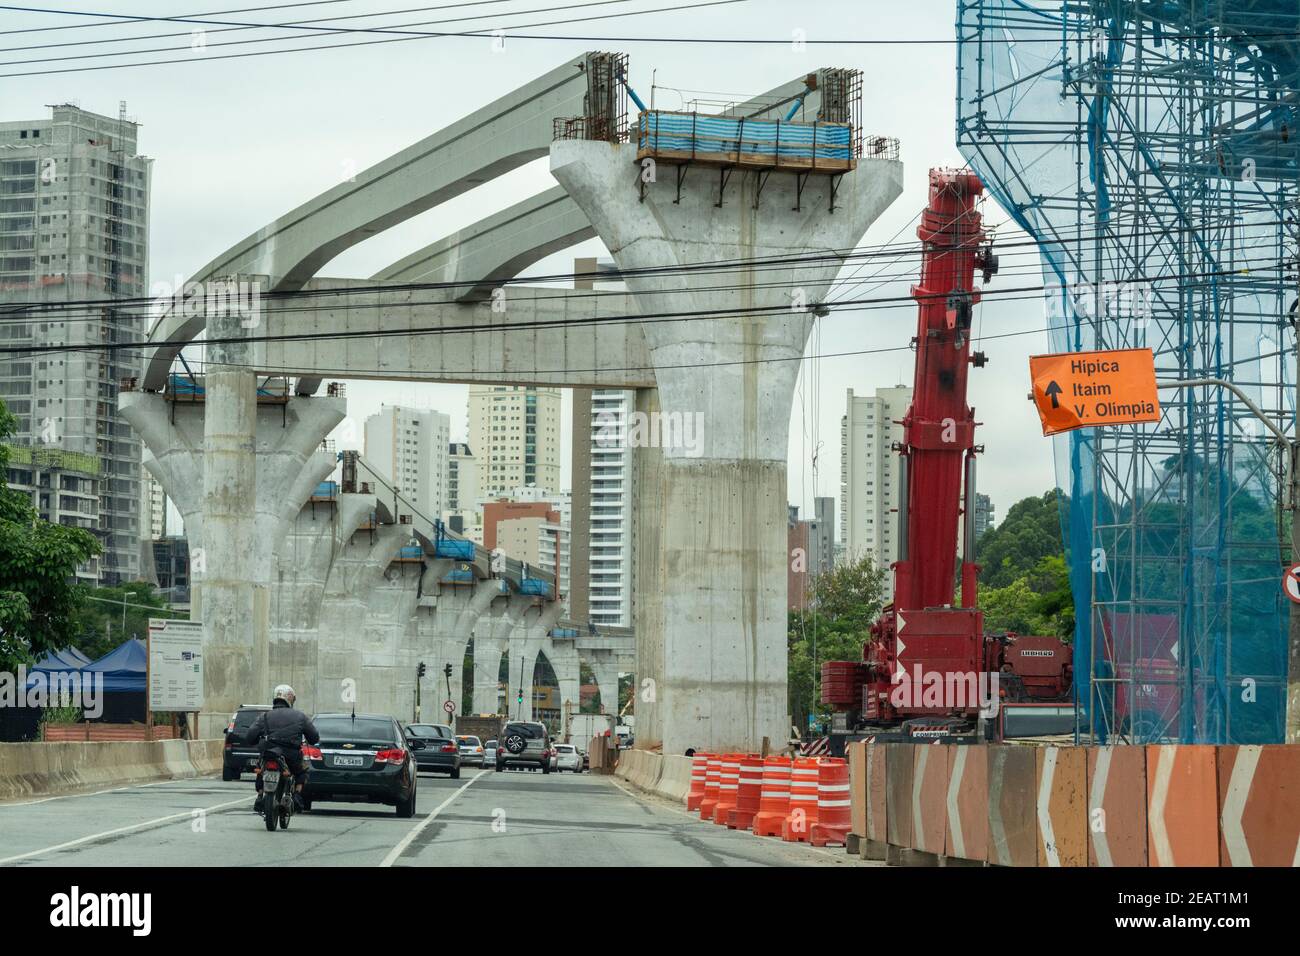 Construction of the new metro line, Line No17 (Gold line)  in Sao Paulo, Brazil.   The line carries a monorail and is part of the city's project for t Stock Photo